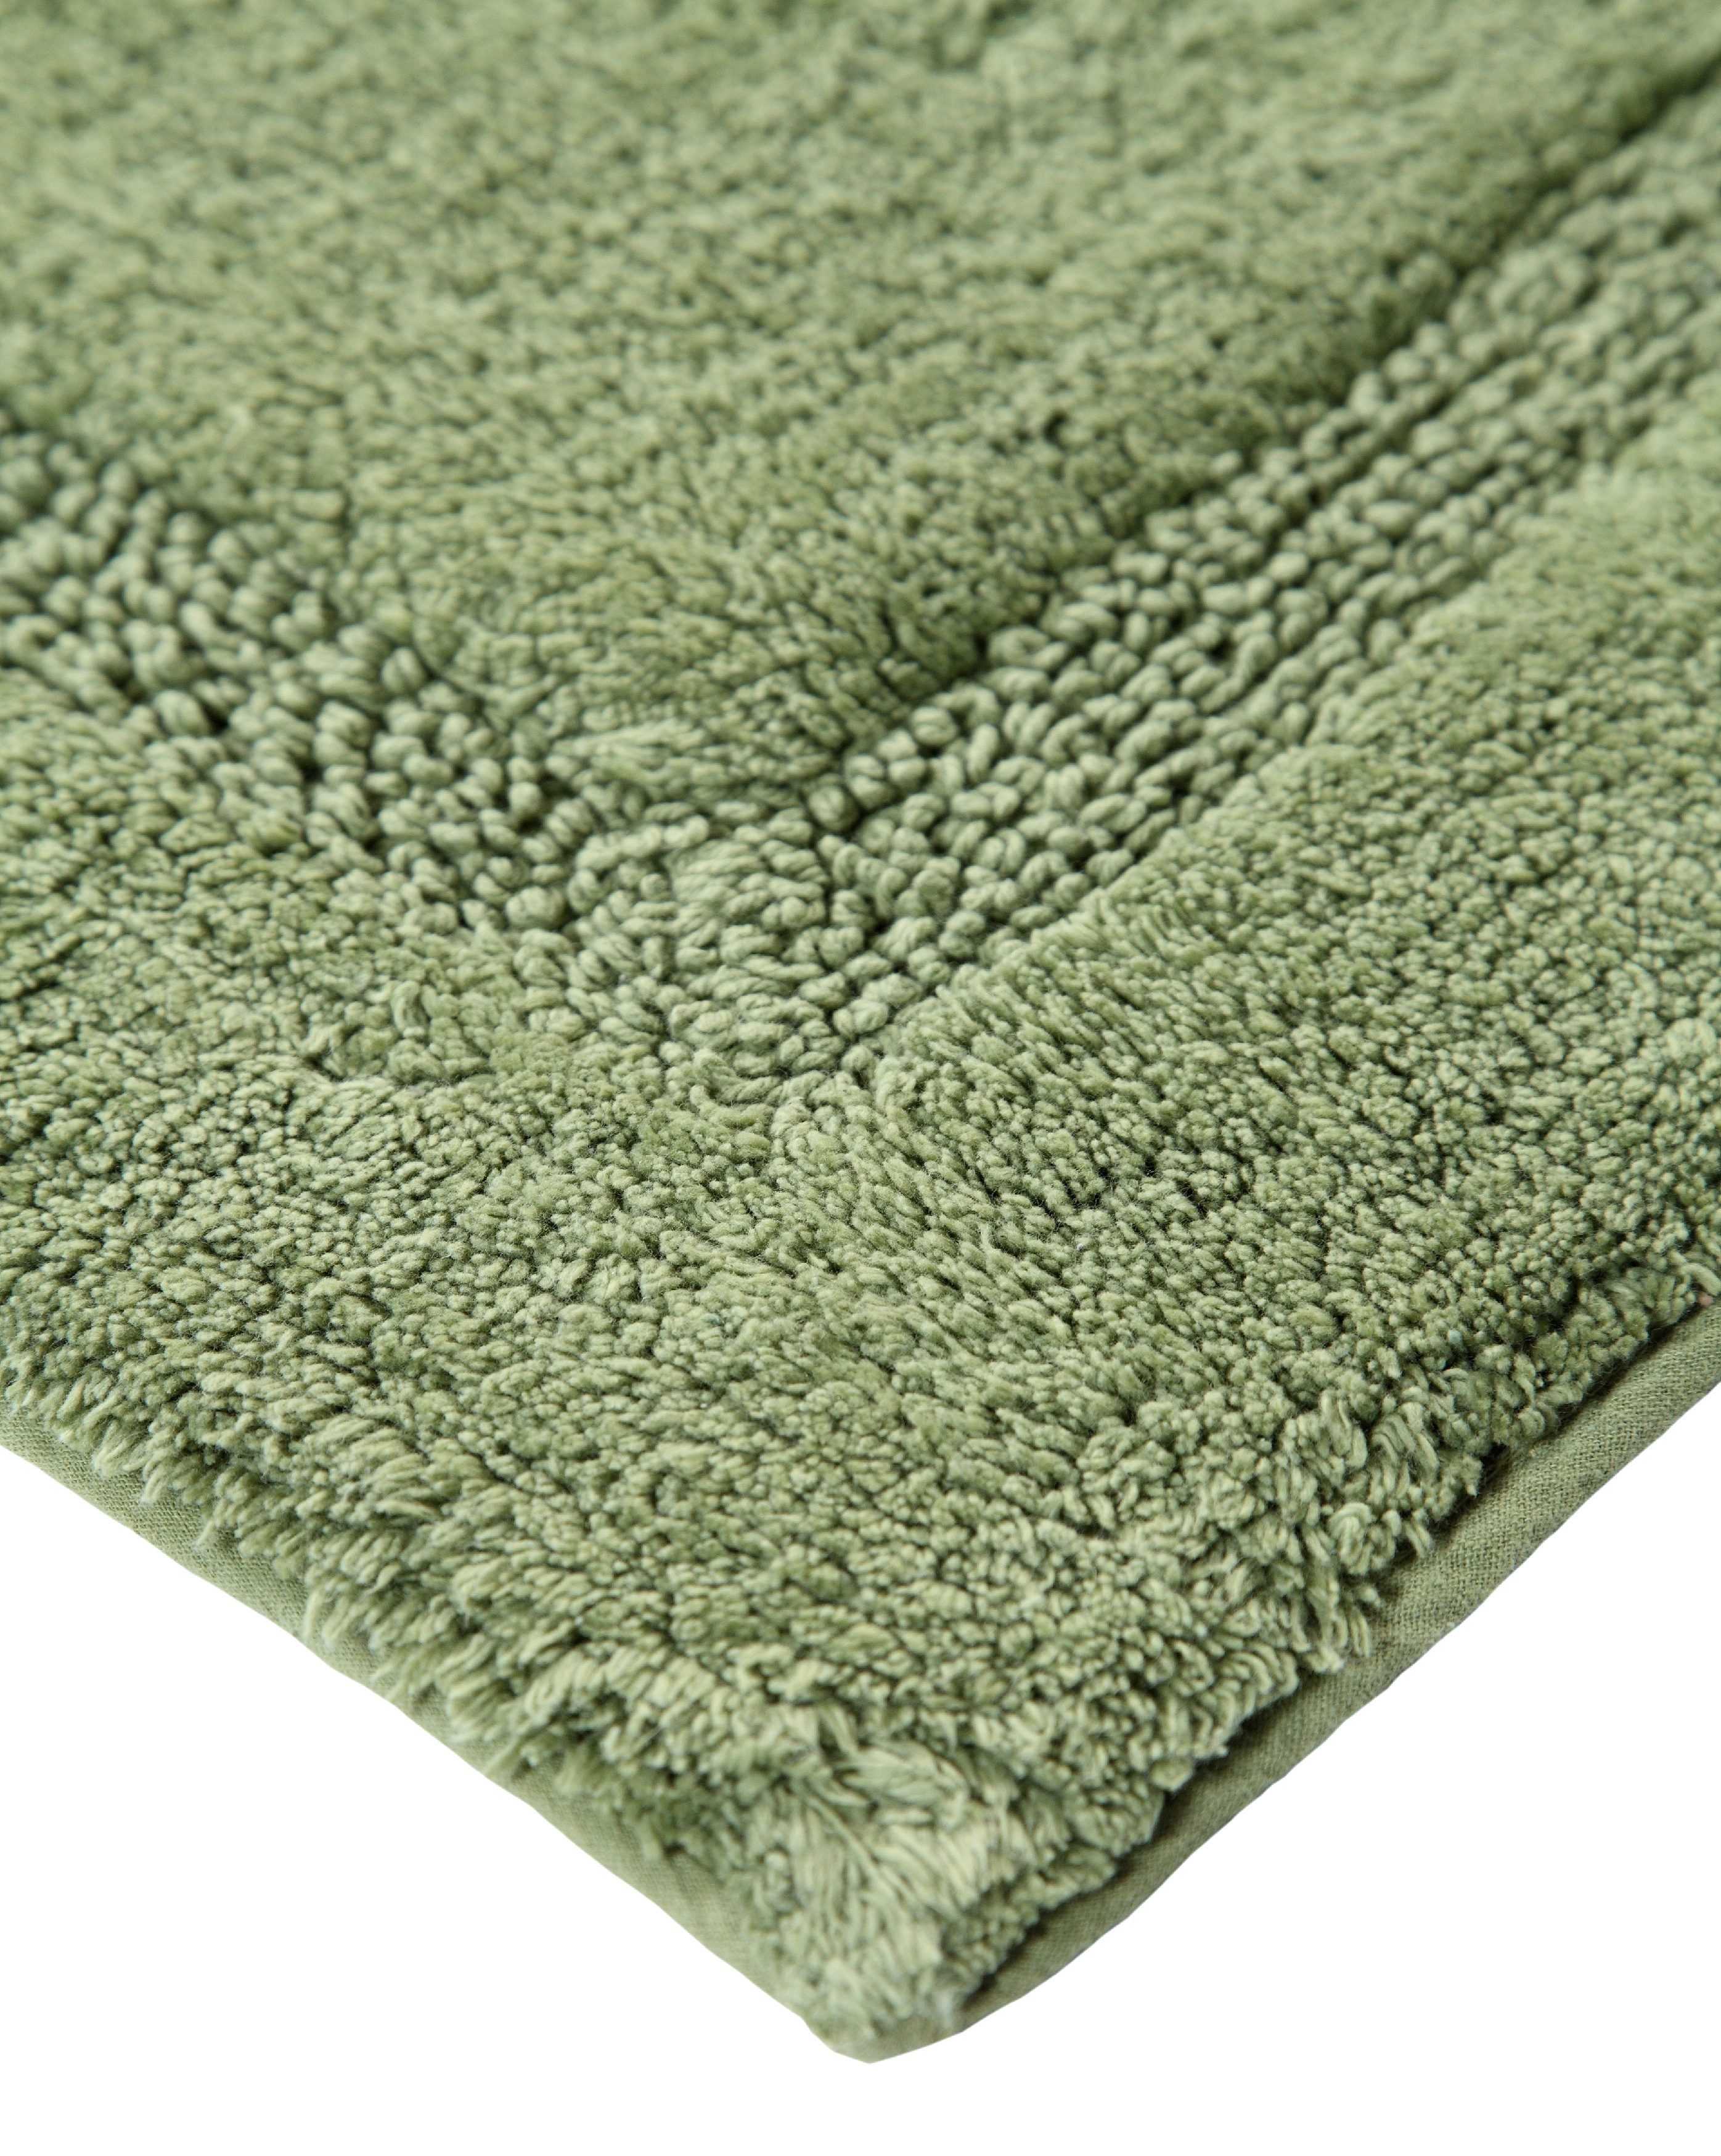 Saffron Fabs Bath Rug 100% Soft Cotton, Size 50x30 Inch, Latex Spray  Non-Skid Backing, Solid Grey Color, Textured Border, Hand Tufted, Heavy 190  GSF